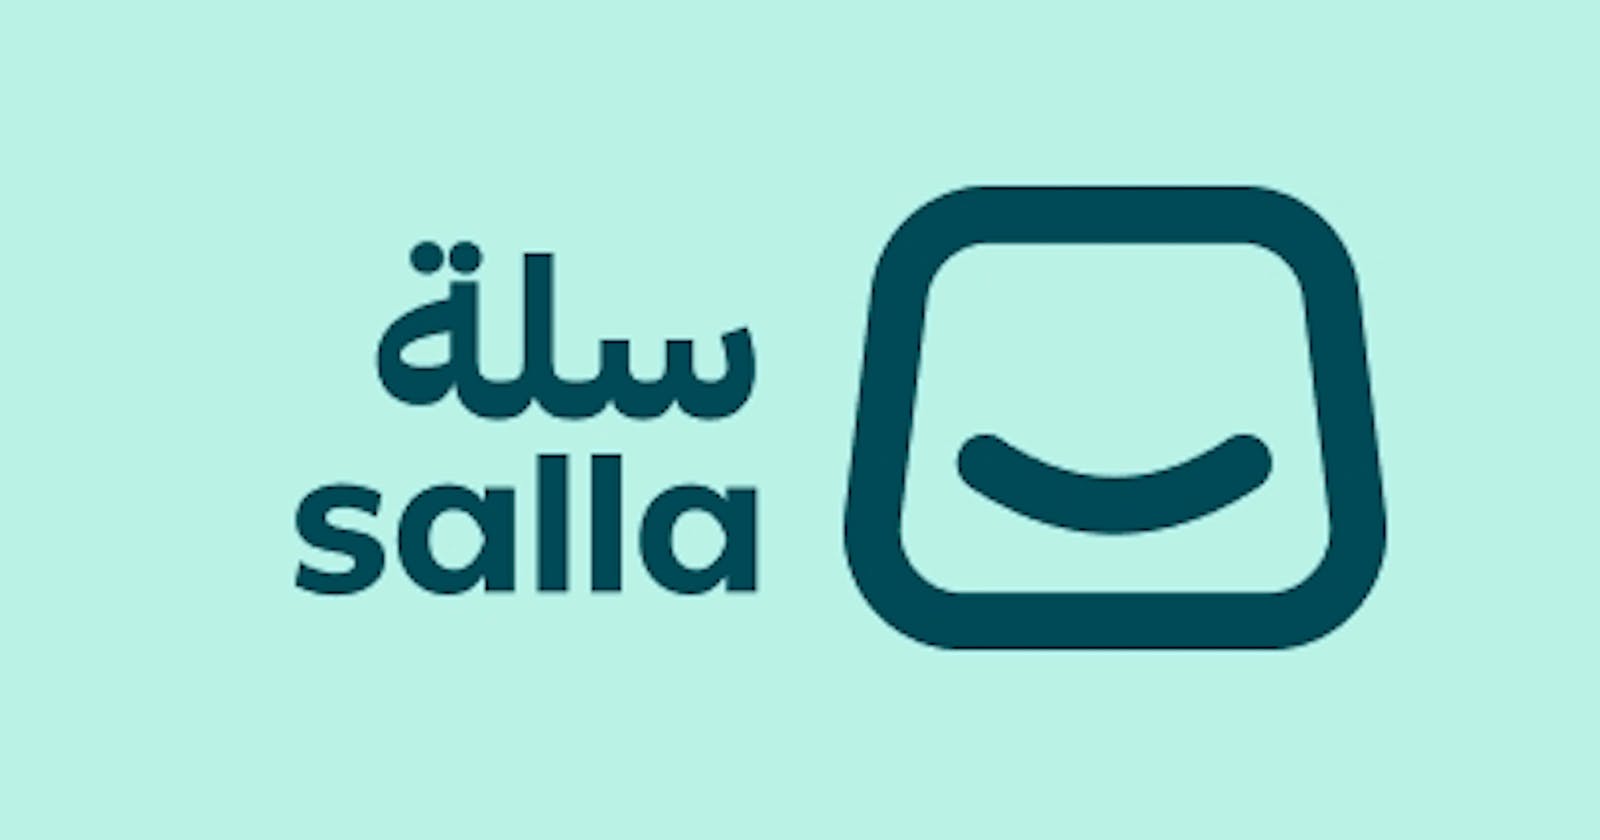 Why create Apps and Themes with Salla